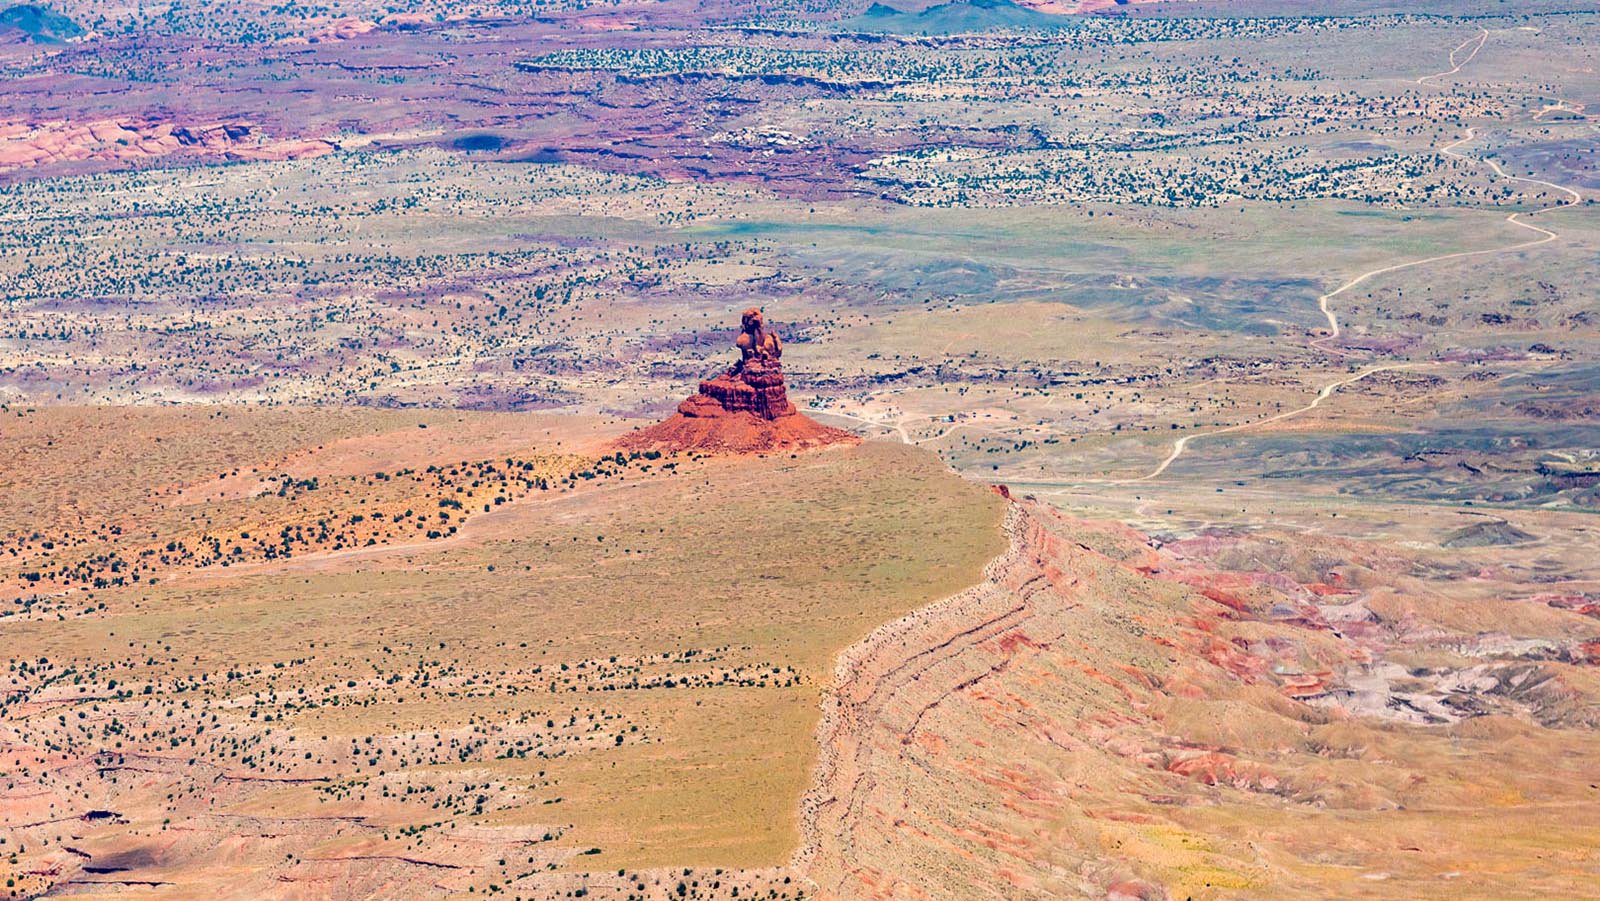 Blog image 1595 of a red rock formation in the Navajo Nation